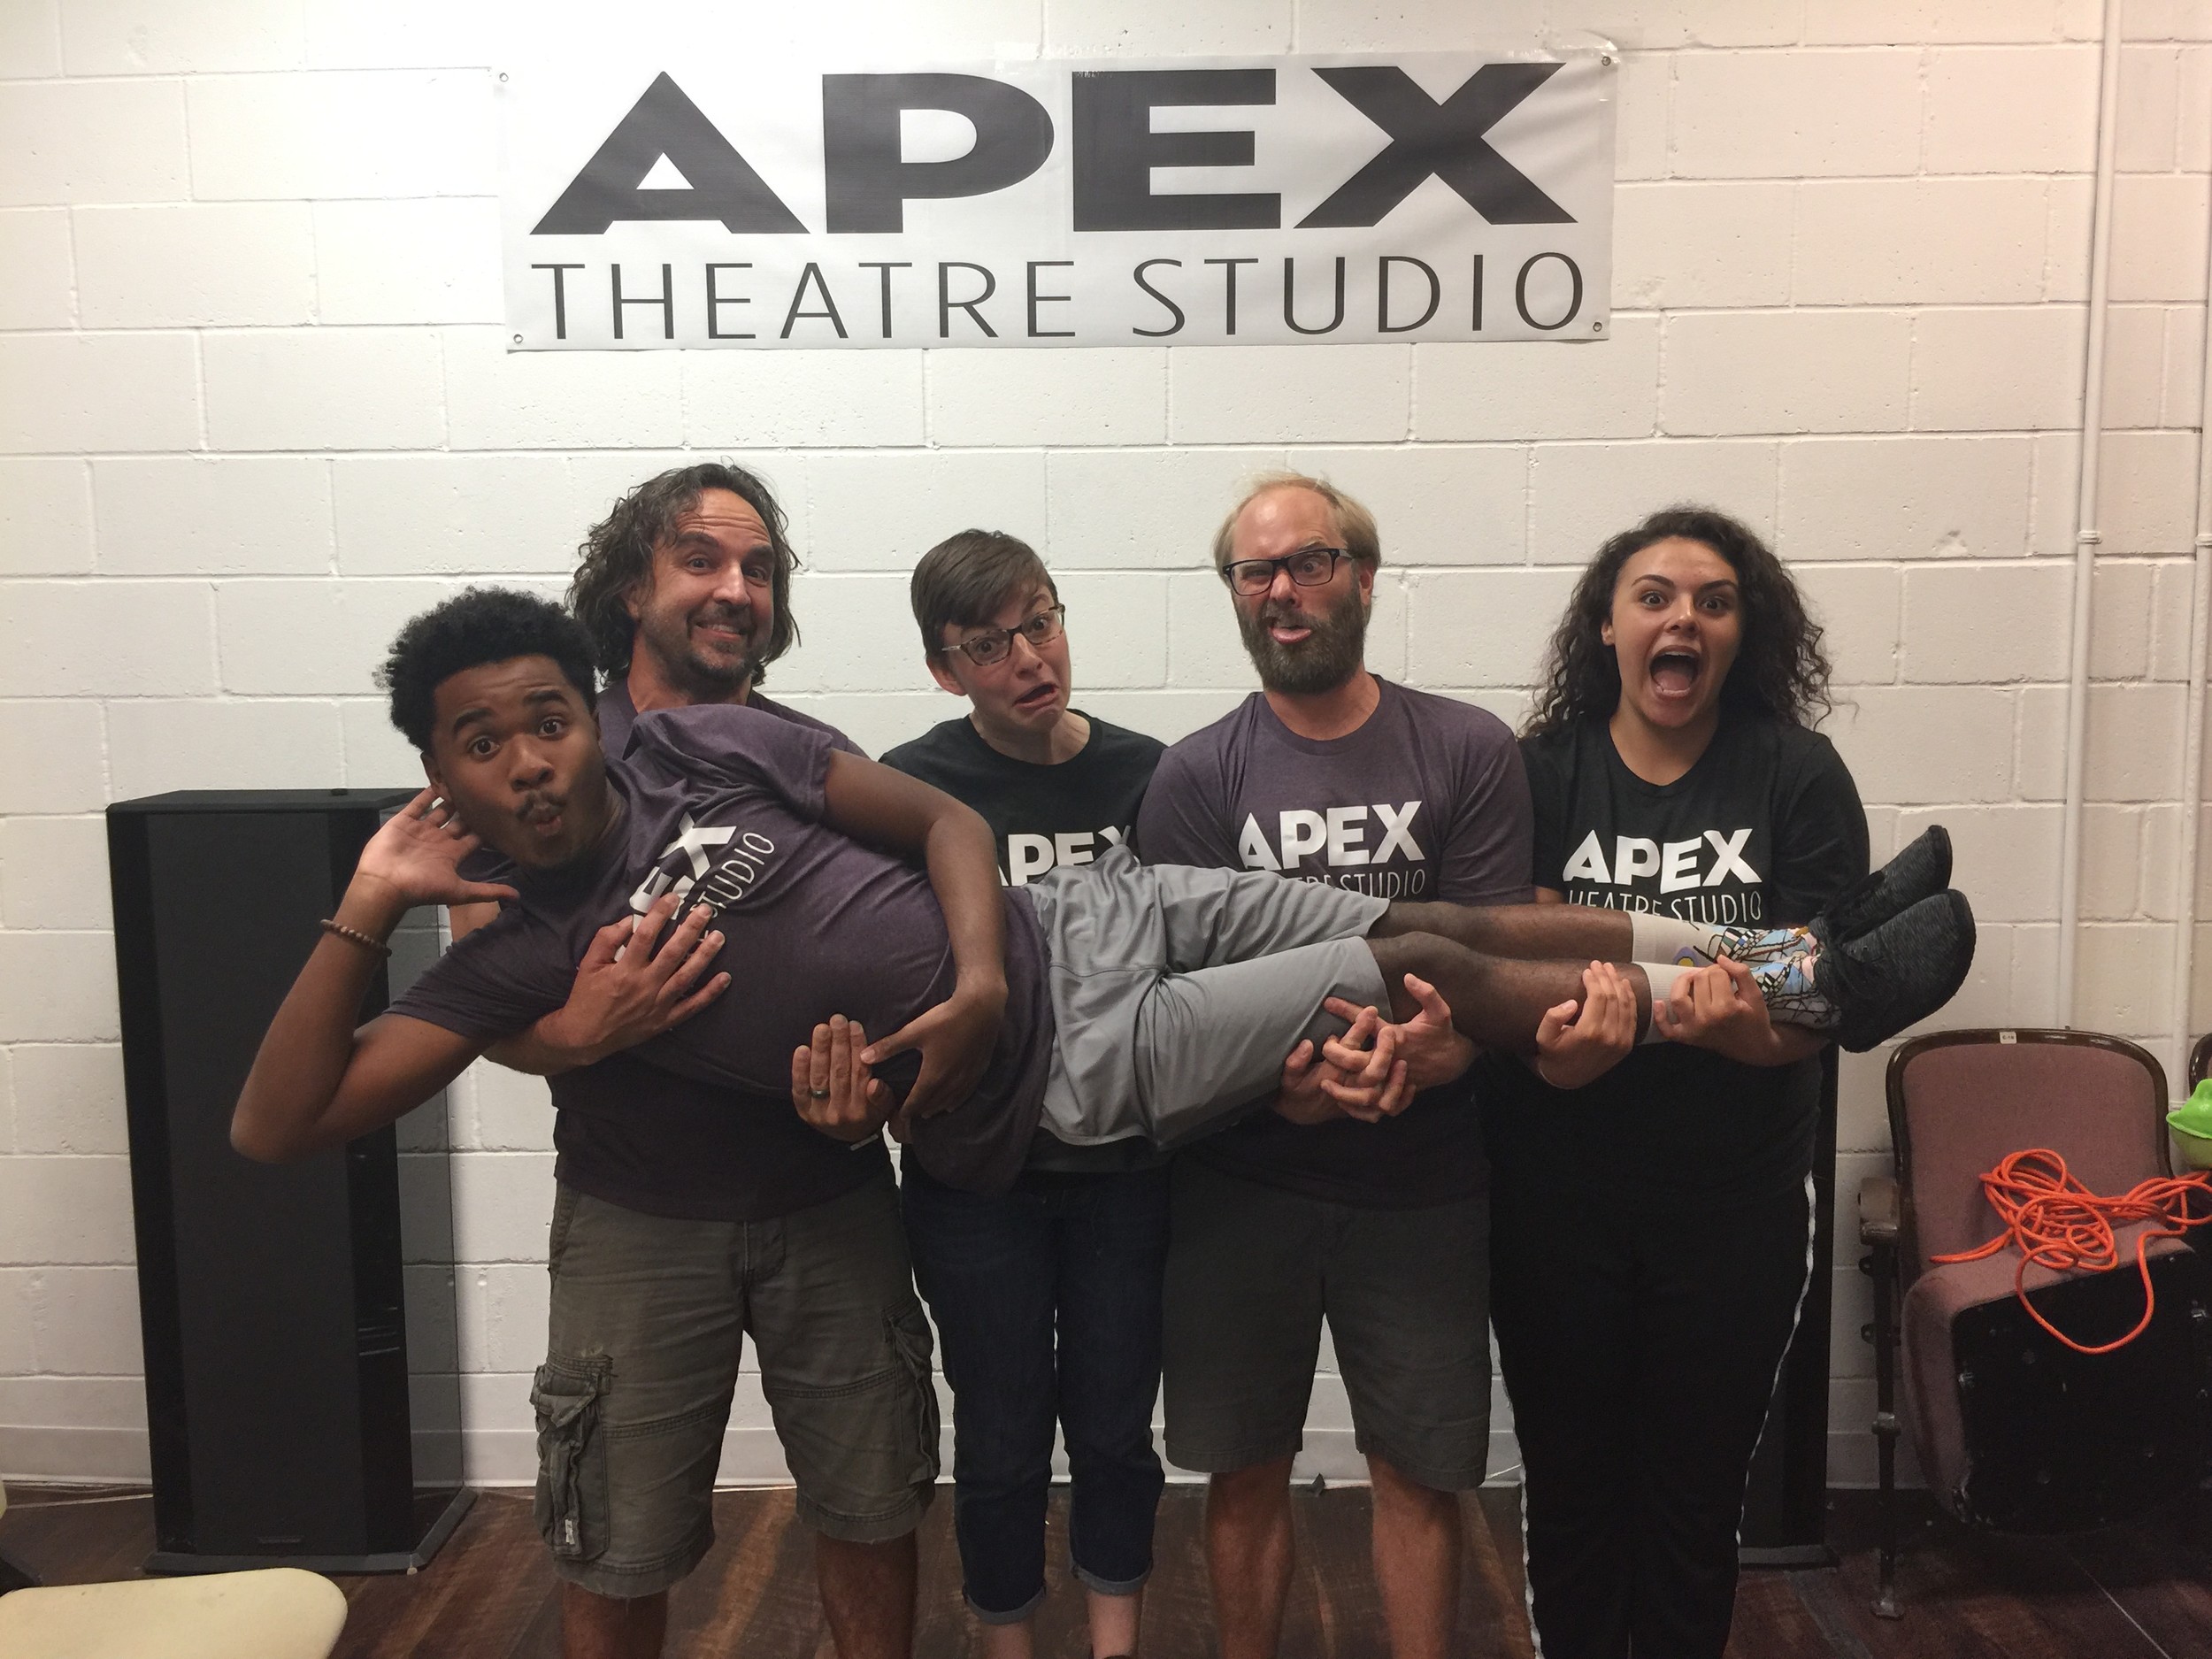 Jason Nettle, Emily Auwaerter, Robert Reid and Anita Diaz (stage manager) hold up Chase Pittman at a rehearsal for “The Complete Works of William Shakespeare Abridged.”